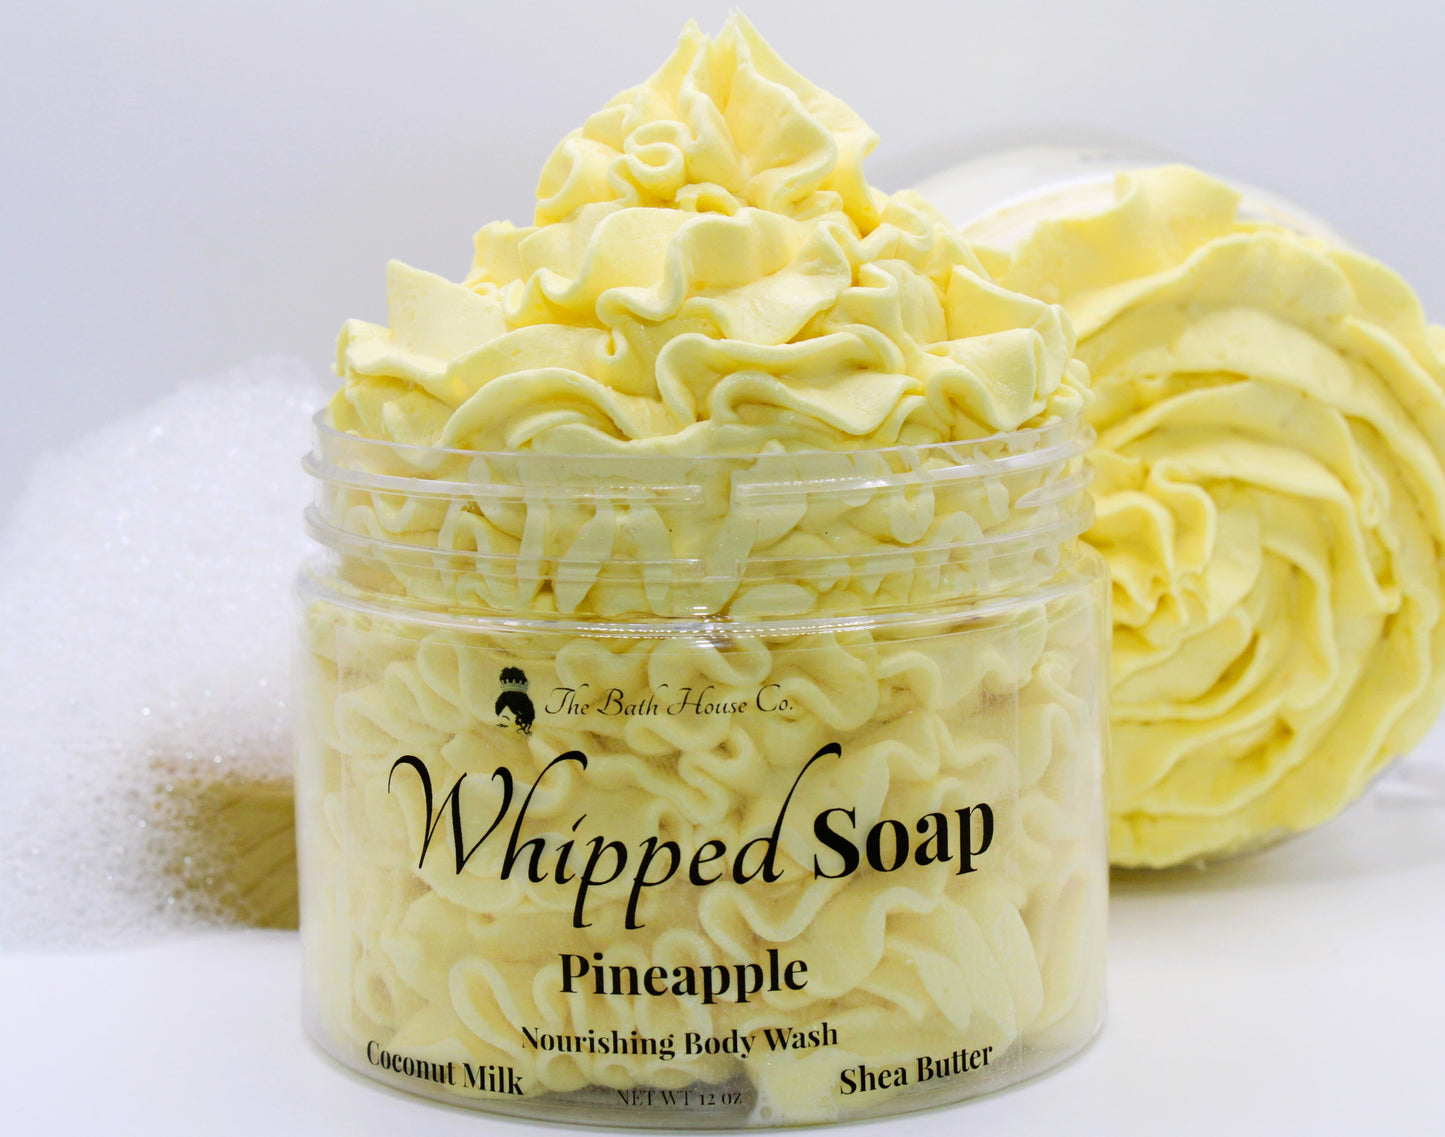 Pineapple Whipped Soap Body Wash